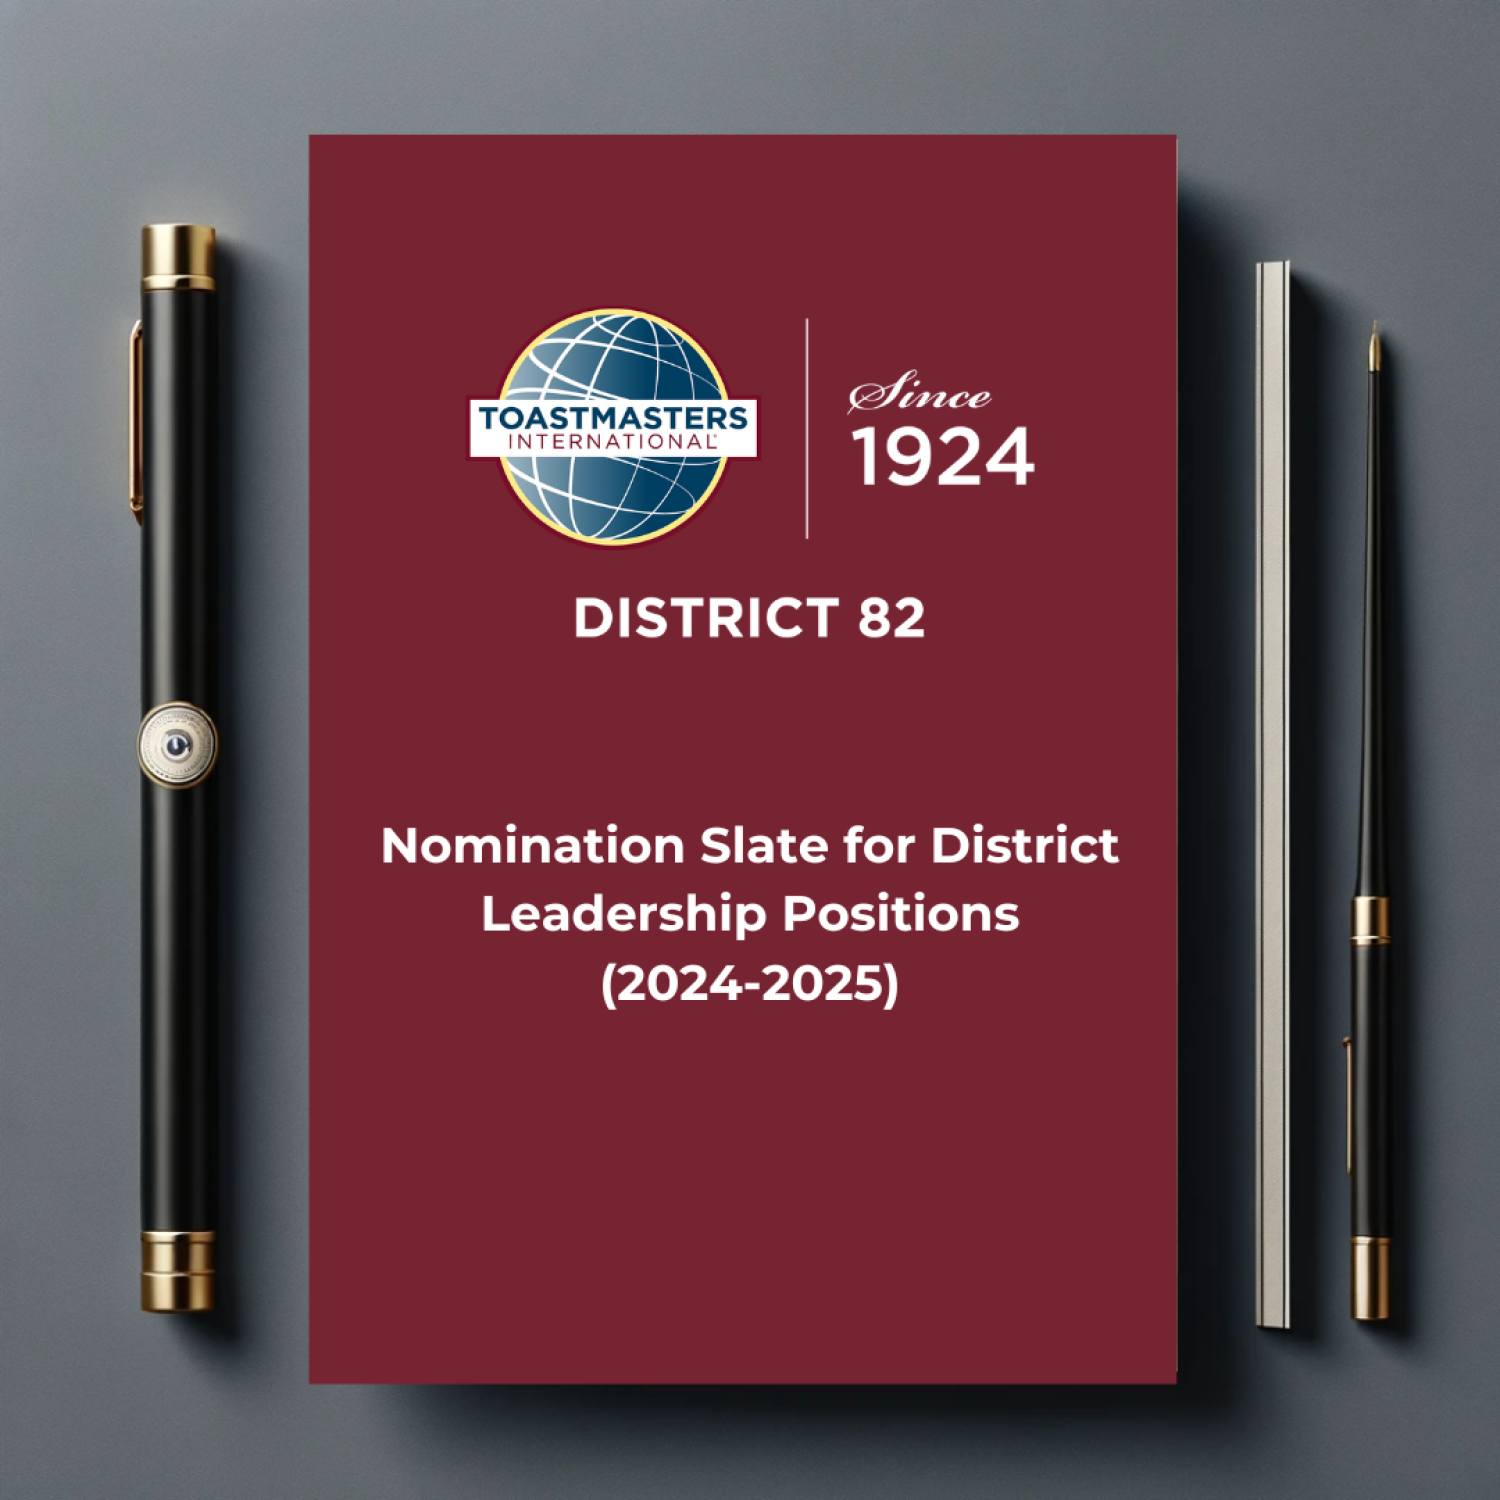 Nomination Slate for District Leadership Positions (2024-2025) – District 82